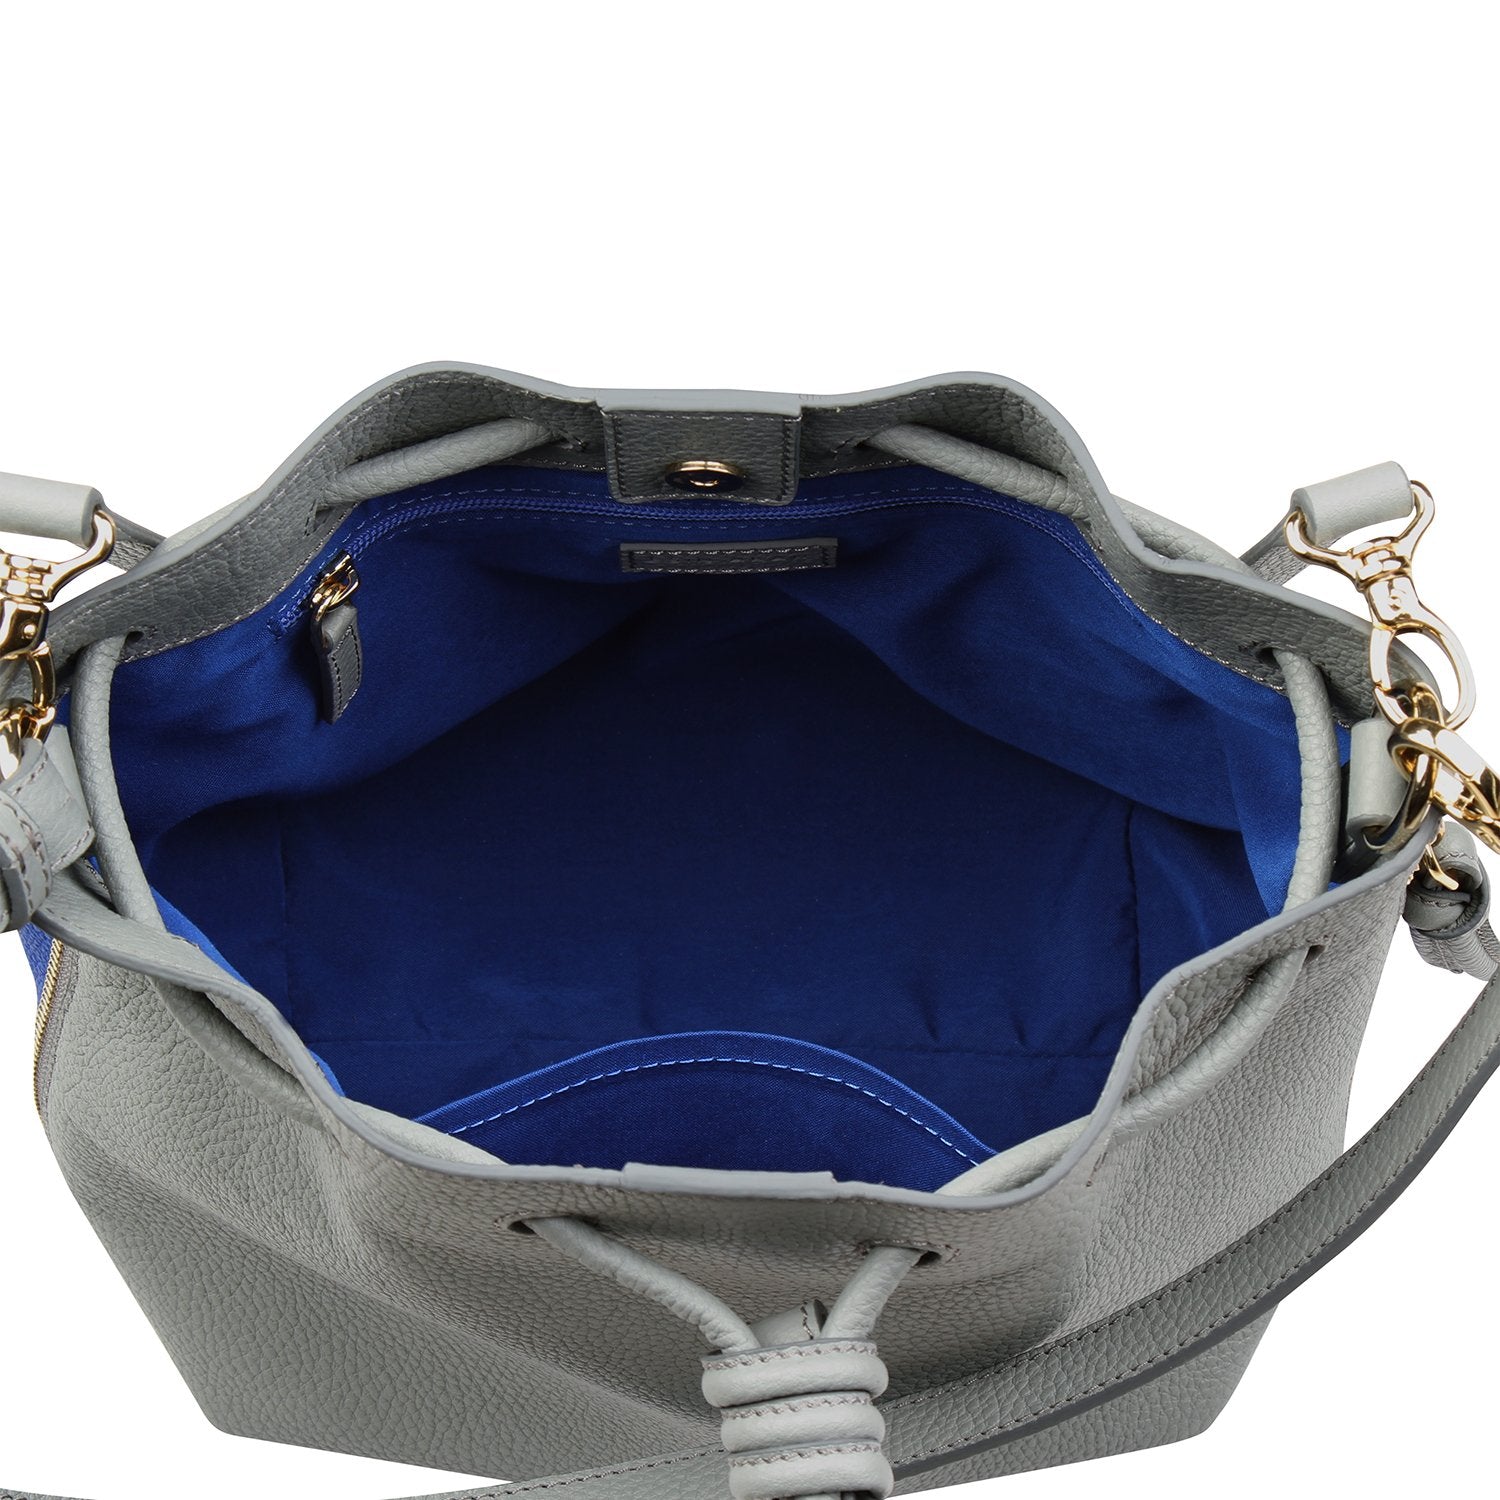 Notting Hill | Womens Leather Backpack Grey With Blue | Esin Akan